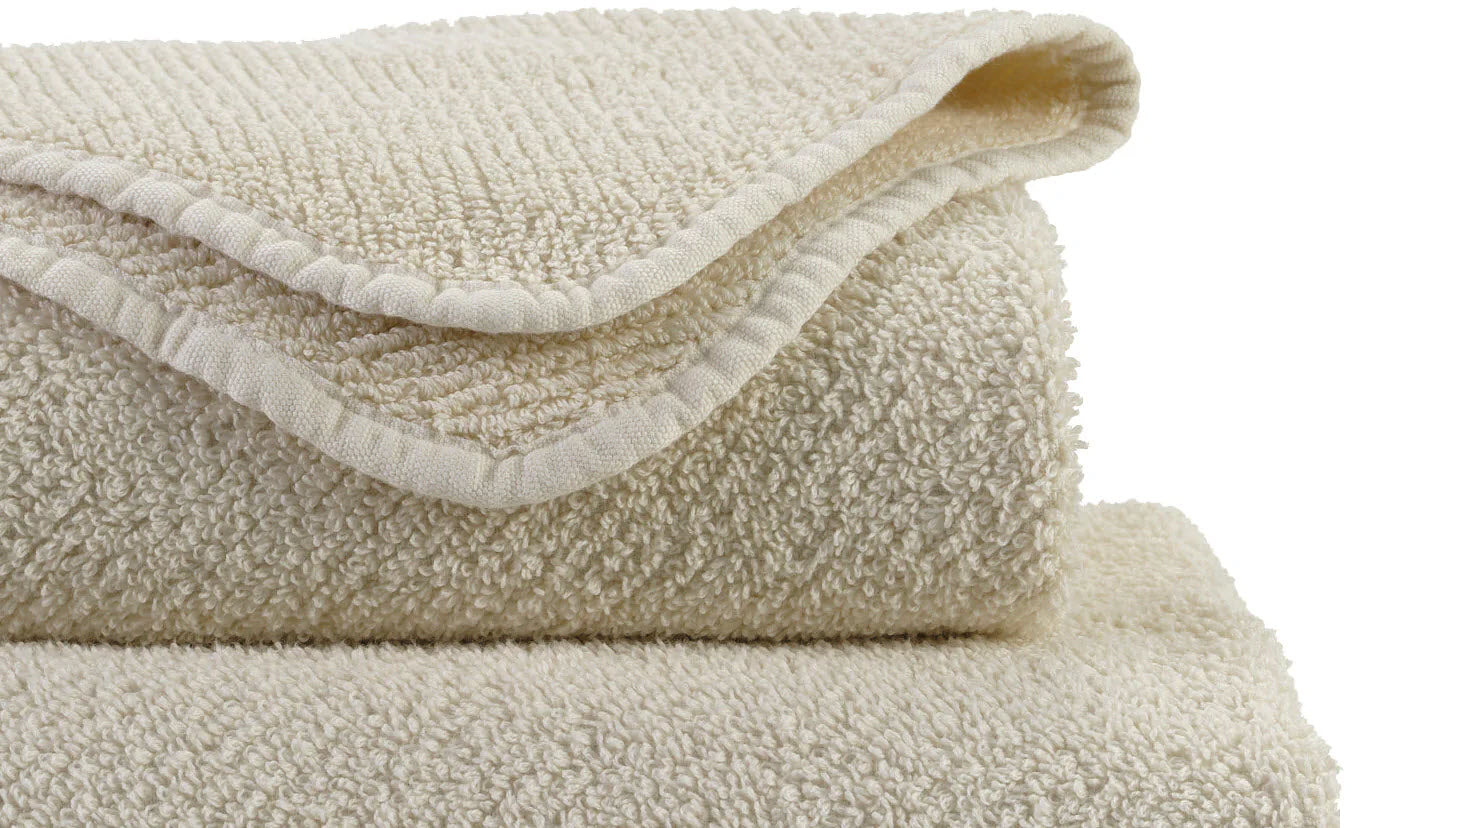 Abyss Twill Towels: Lighter-Weight, Textured Luxury Bath Towels